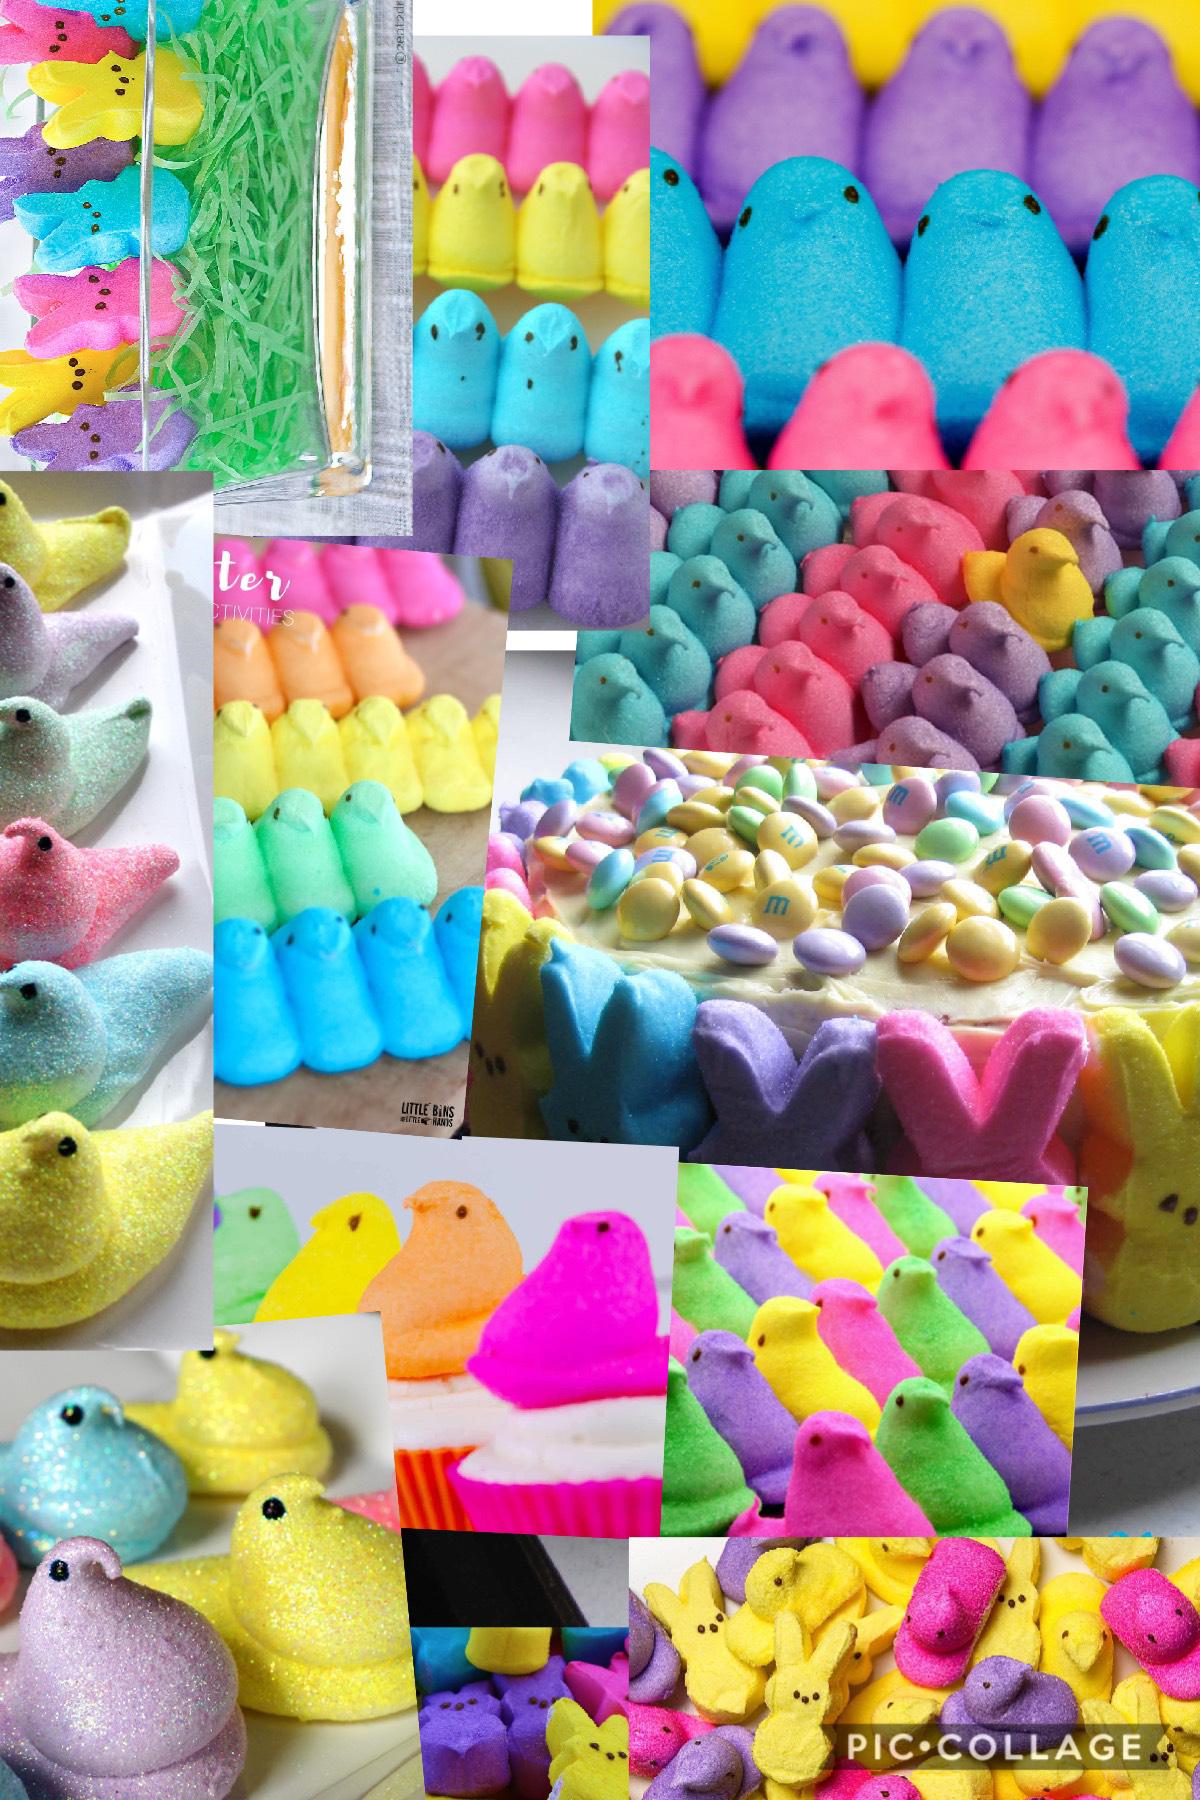 Hey guys let’s get ready for Easter! Who likes peeps ?!